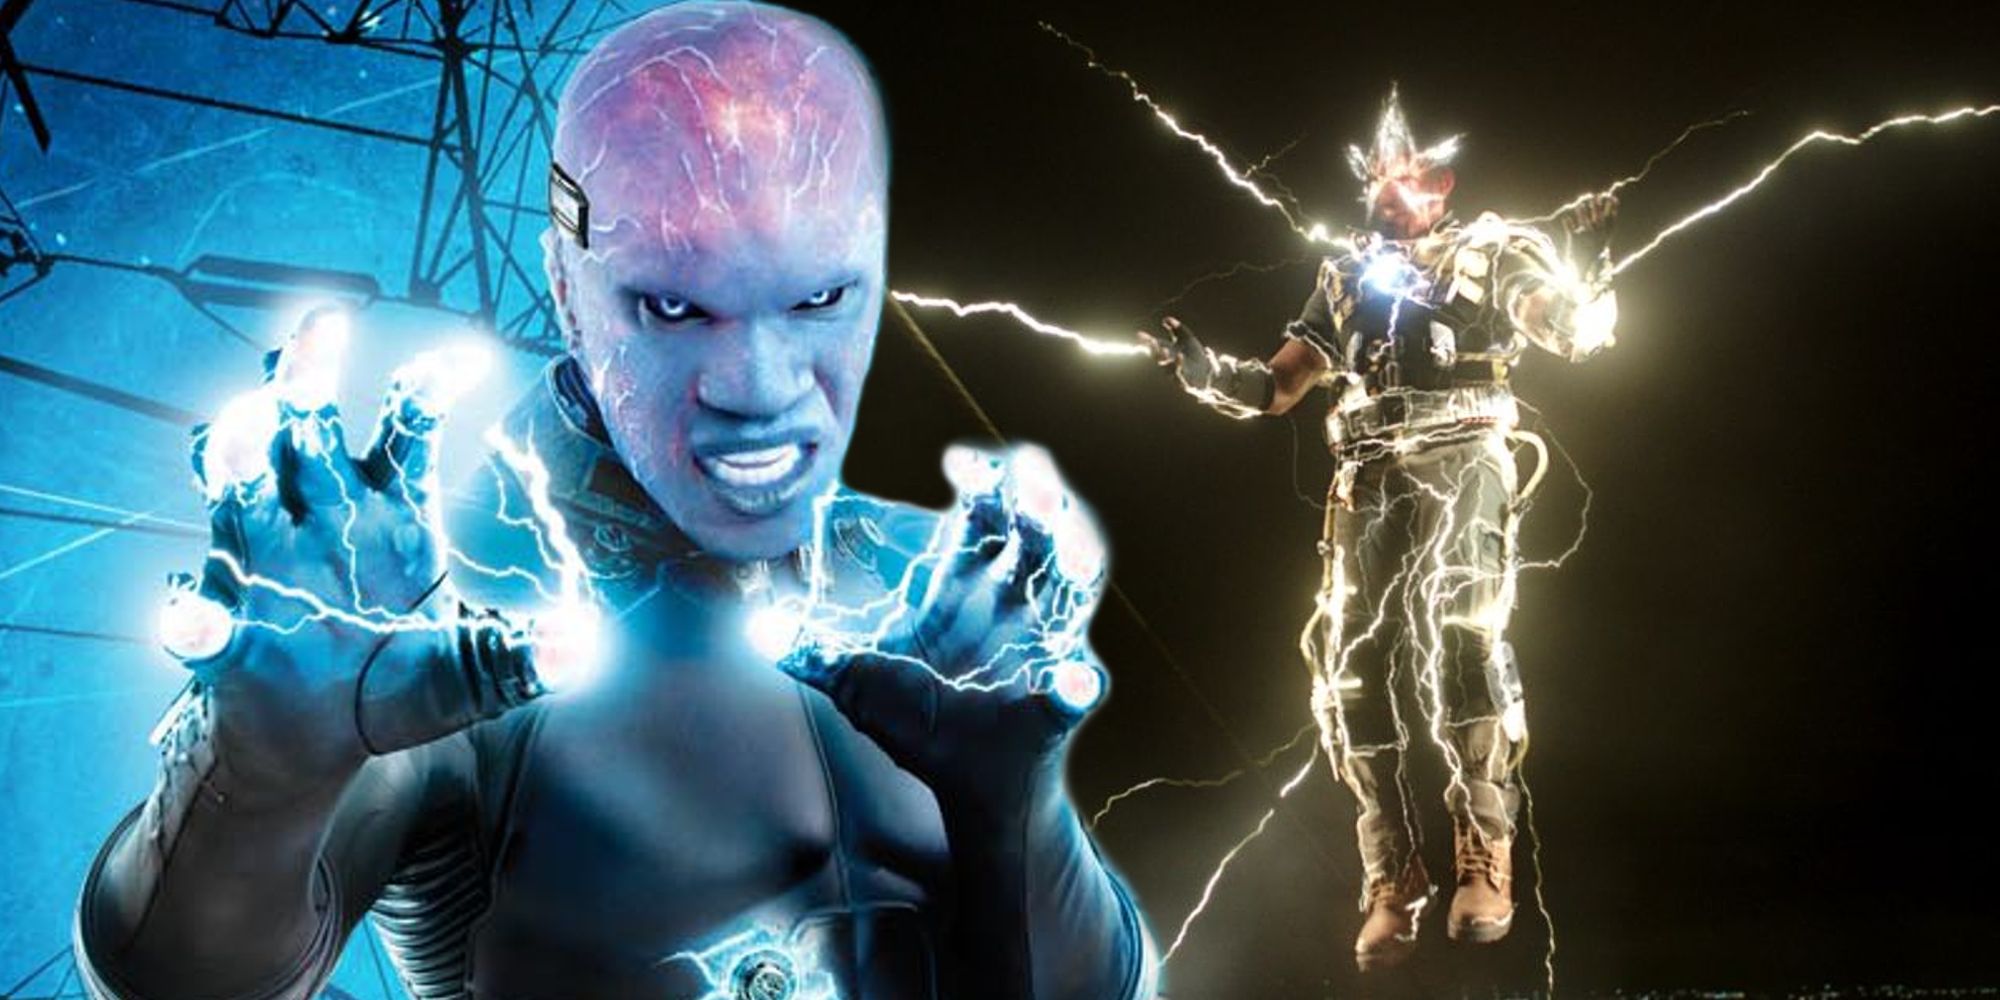 Jamie Foxx as Electro in The Amazing Spider-Man and No Way Home